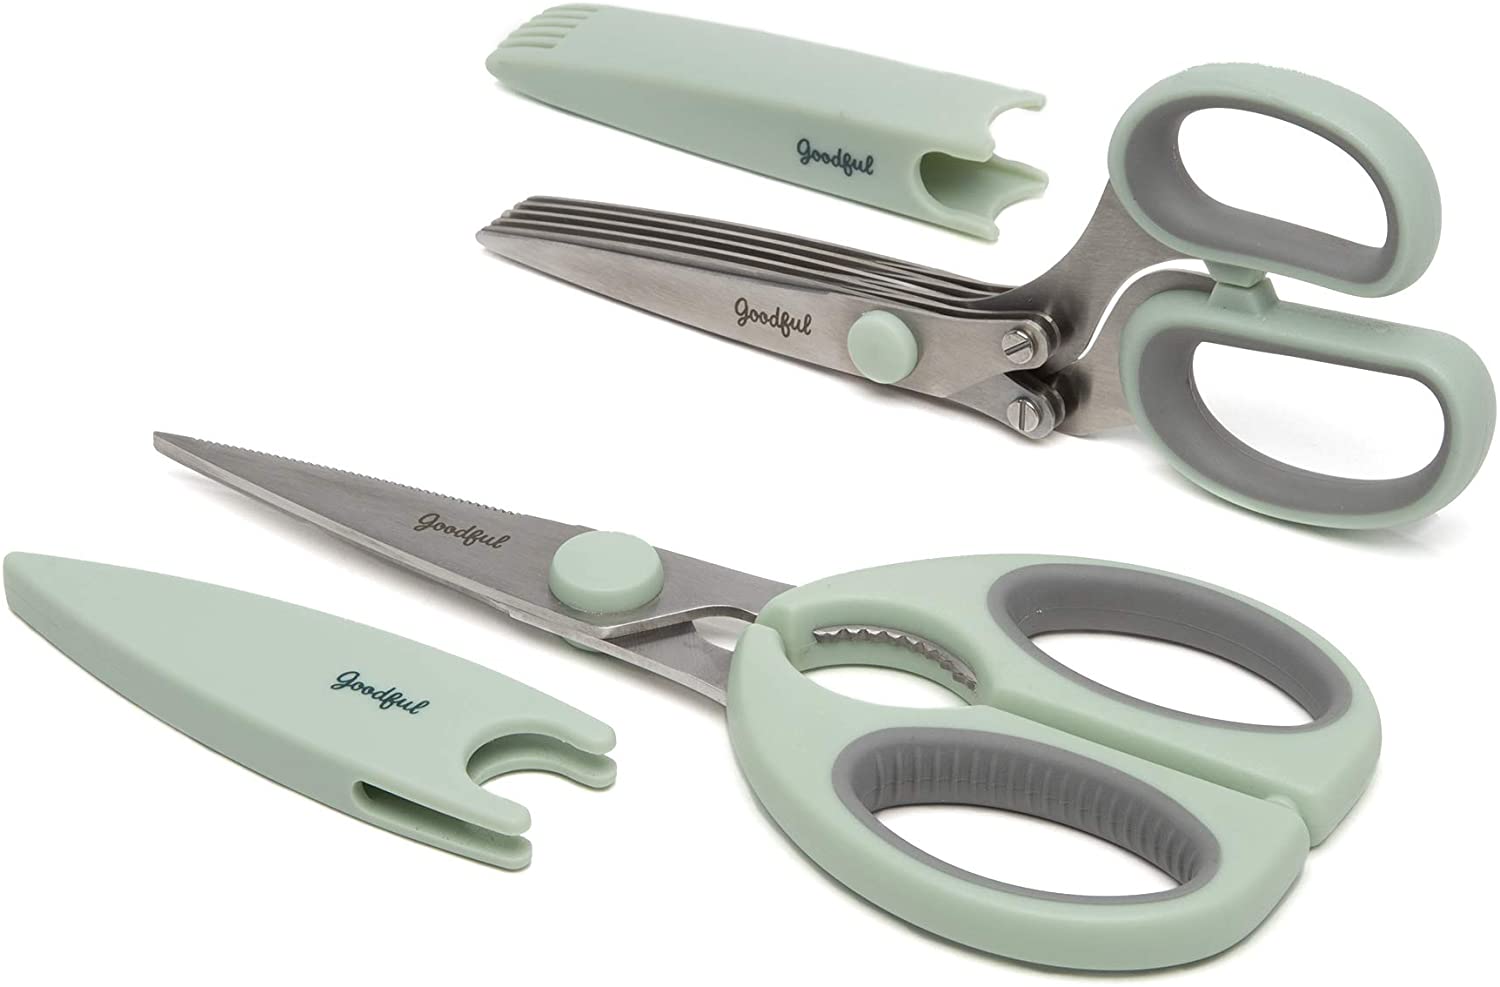 2-Pack Goodful Herb Shear Set with Guards $7.70 + Free Shipping w/ Prime or on $25+